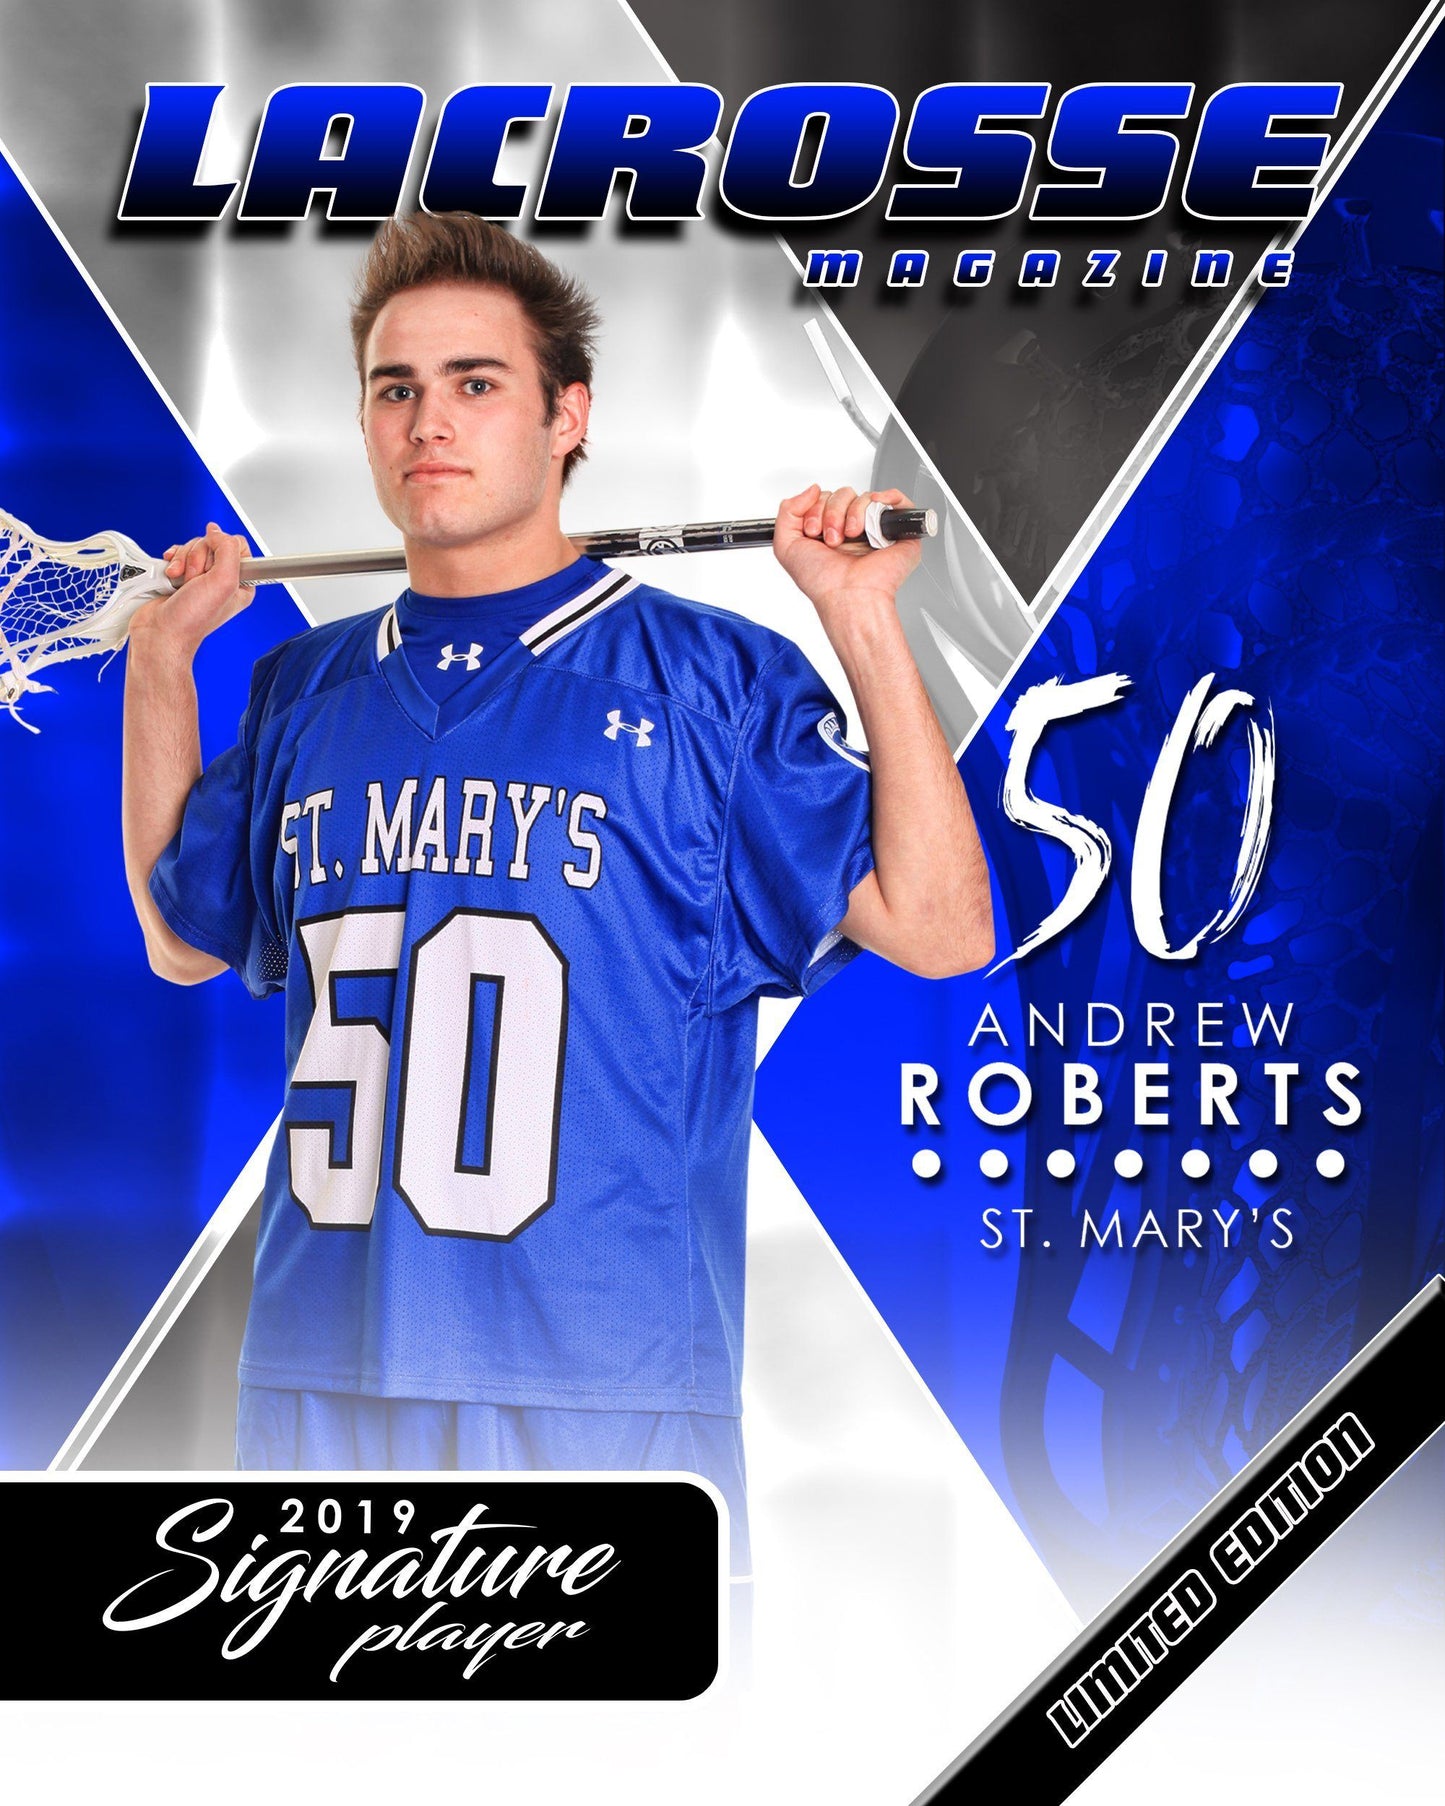 Signature Player - Lacrosse - V2 - T&I Extraction Collection-Photoshop Template - Photo Solutions